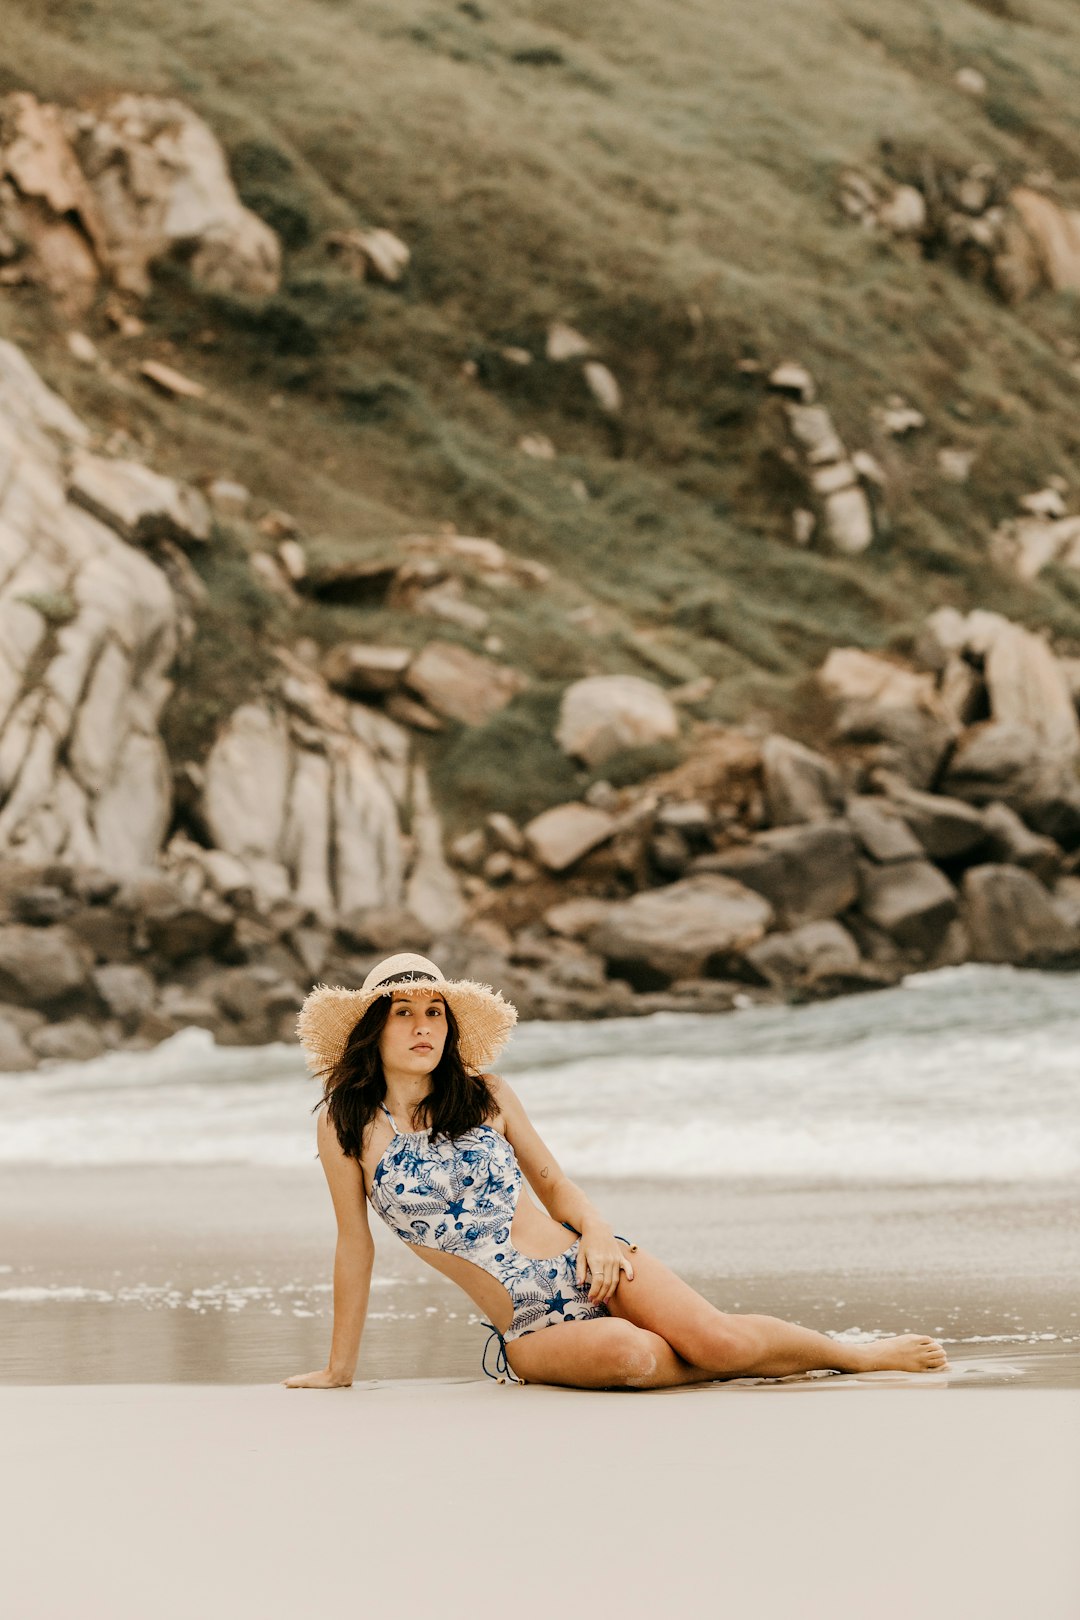 woman in white and blue floral dress sitting on beach shore during daytime